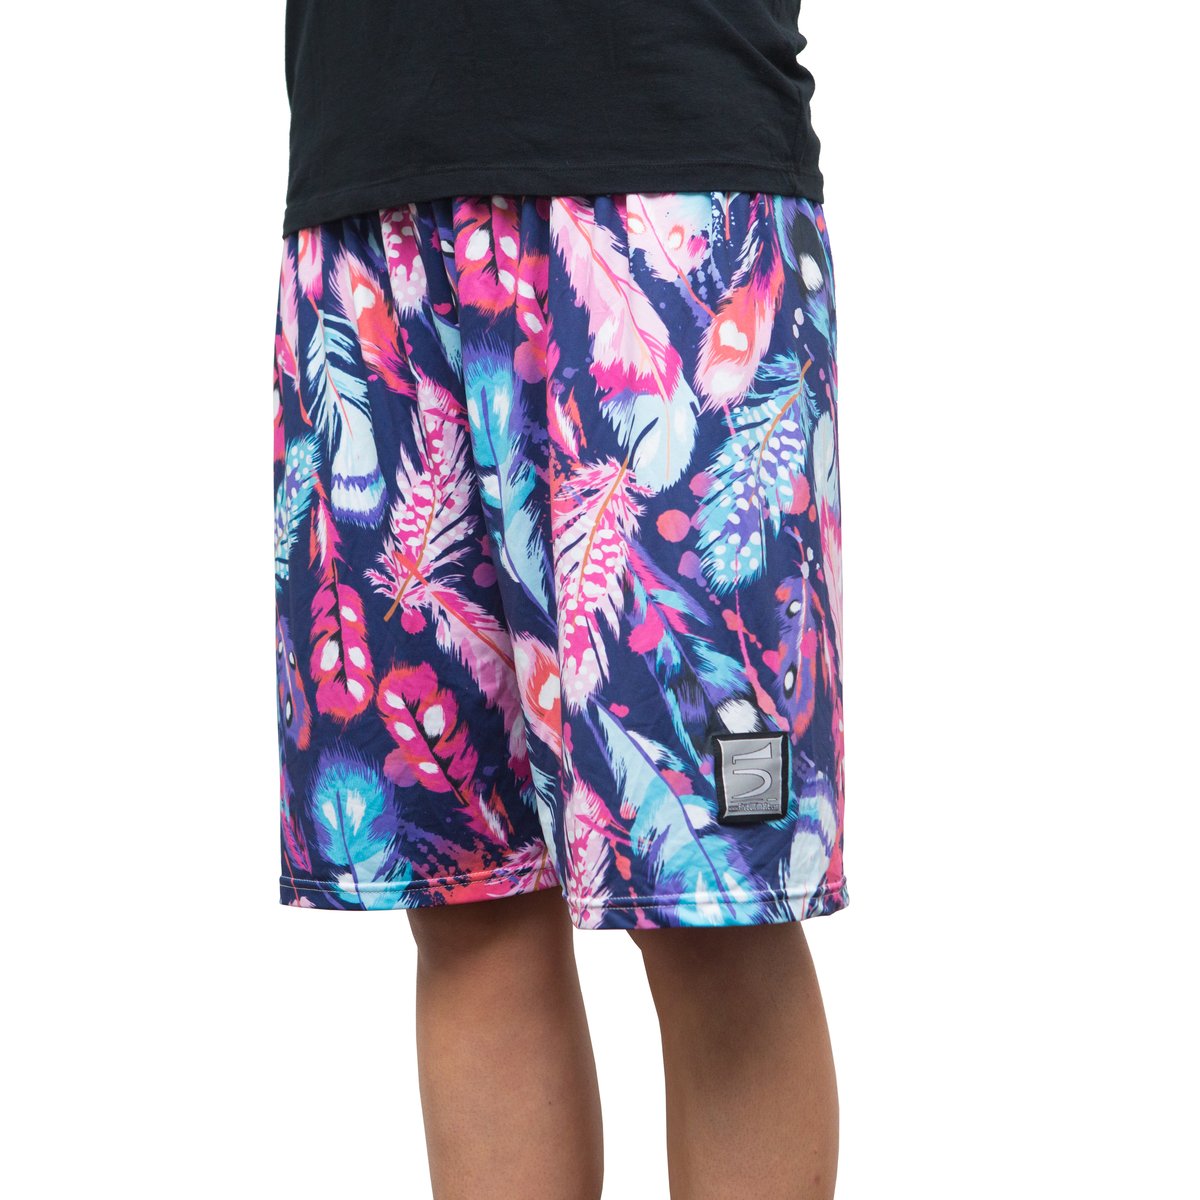 Image of 4 Styles of Sublimated Five Ultimate Hydro Shorts